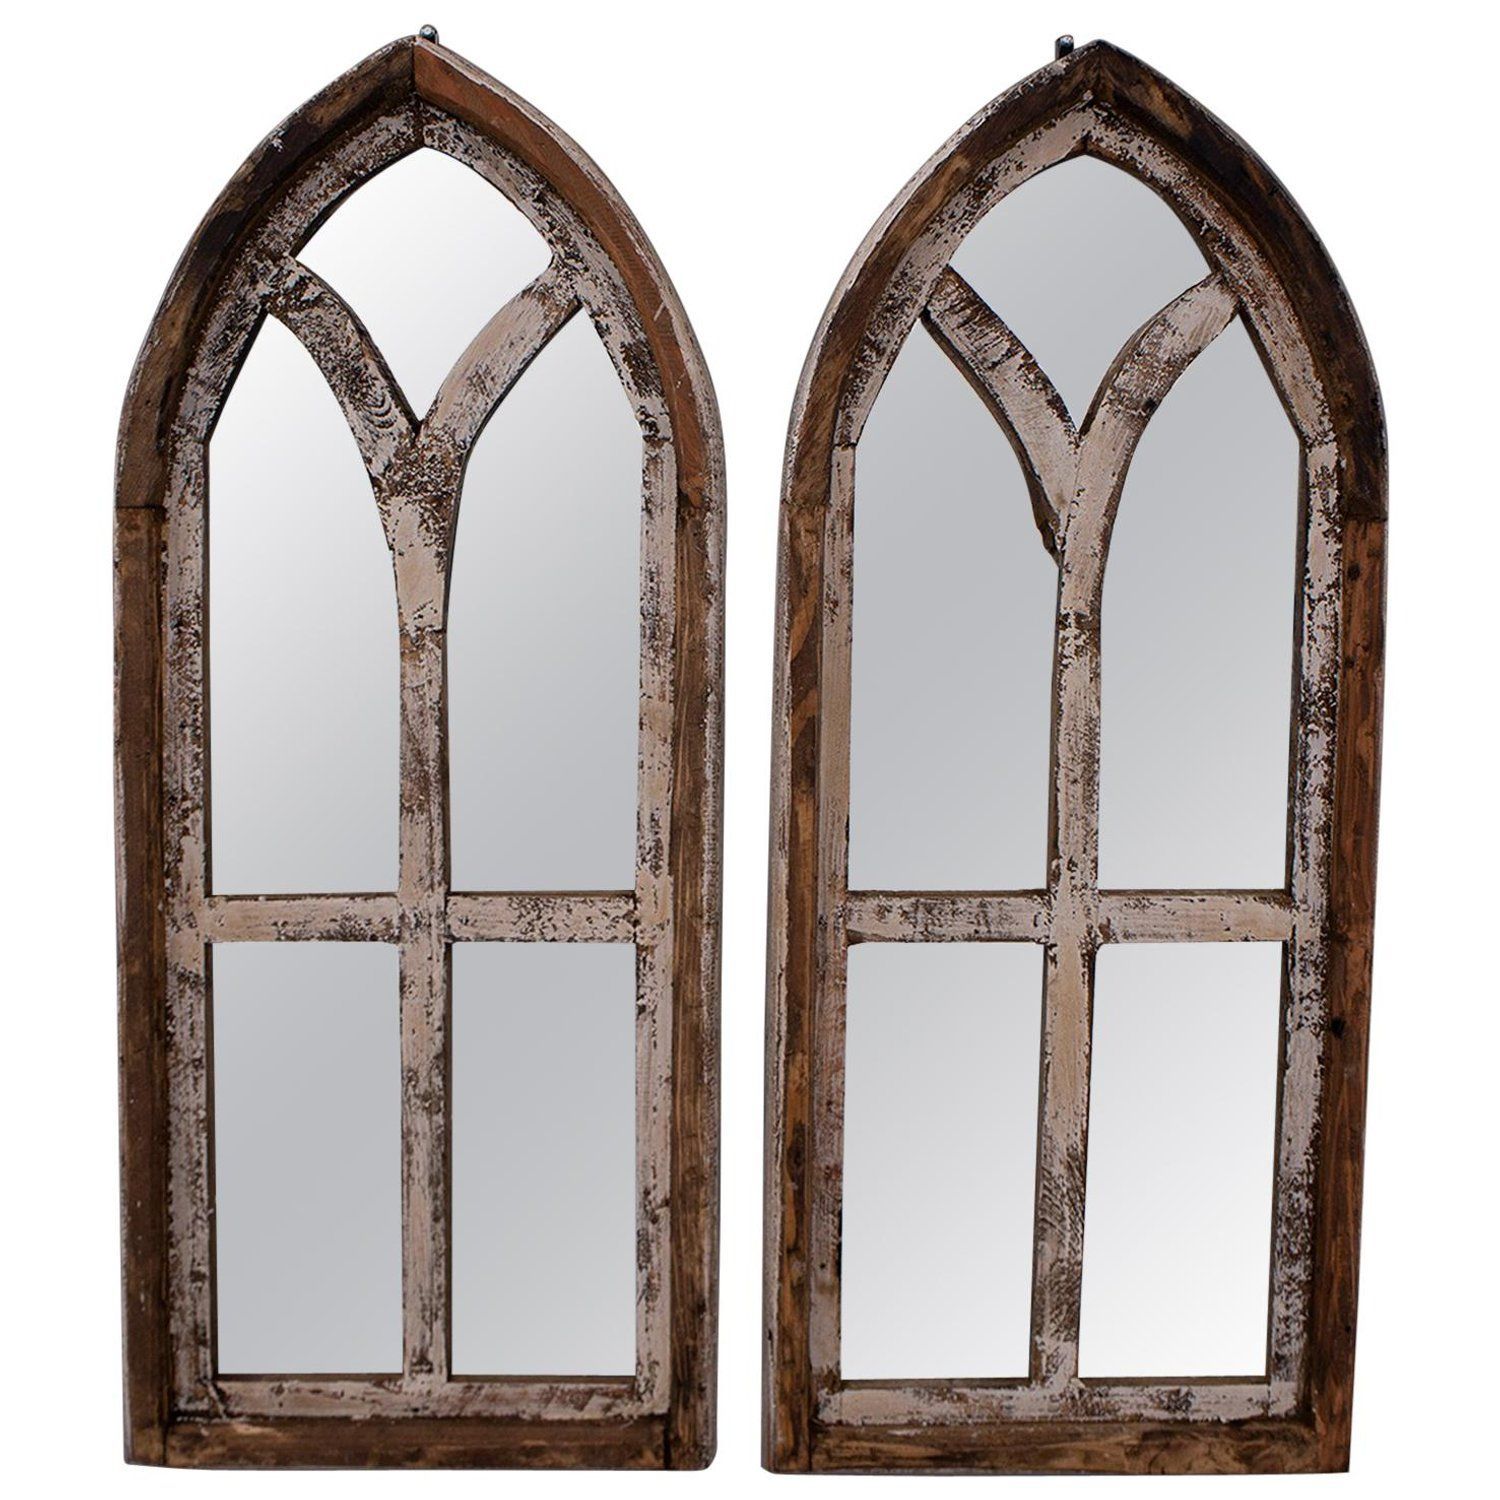 Pair Small Arched Wood Window Frames With Mirrors In 2019 In Romain Accent Mirrors (View 29 of 30)